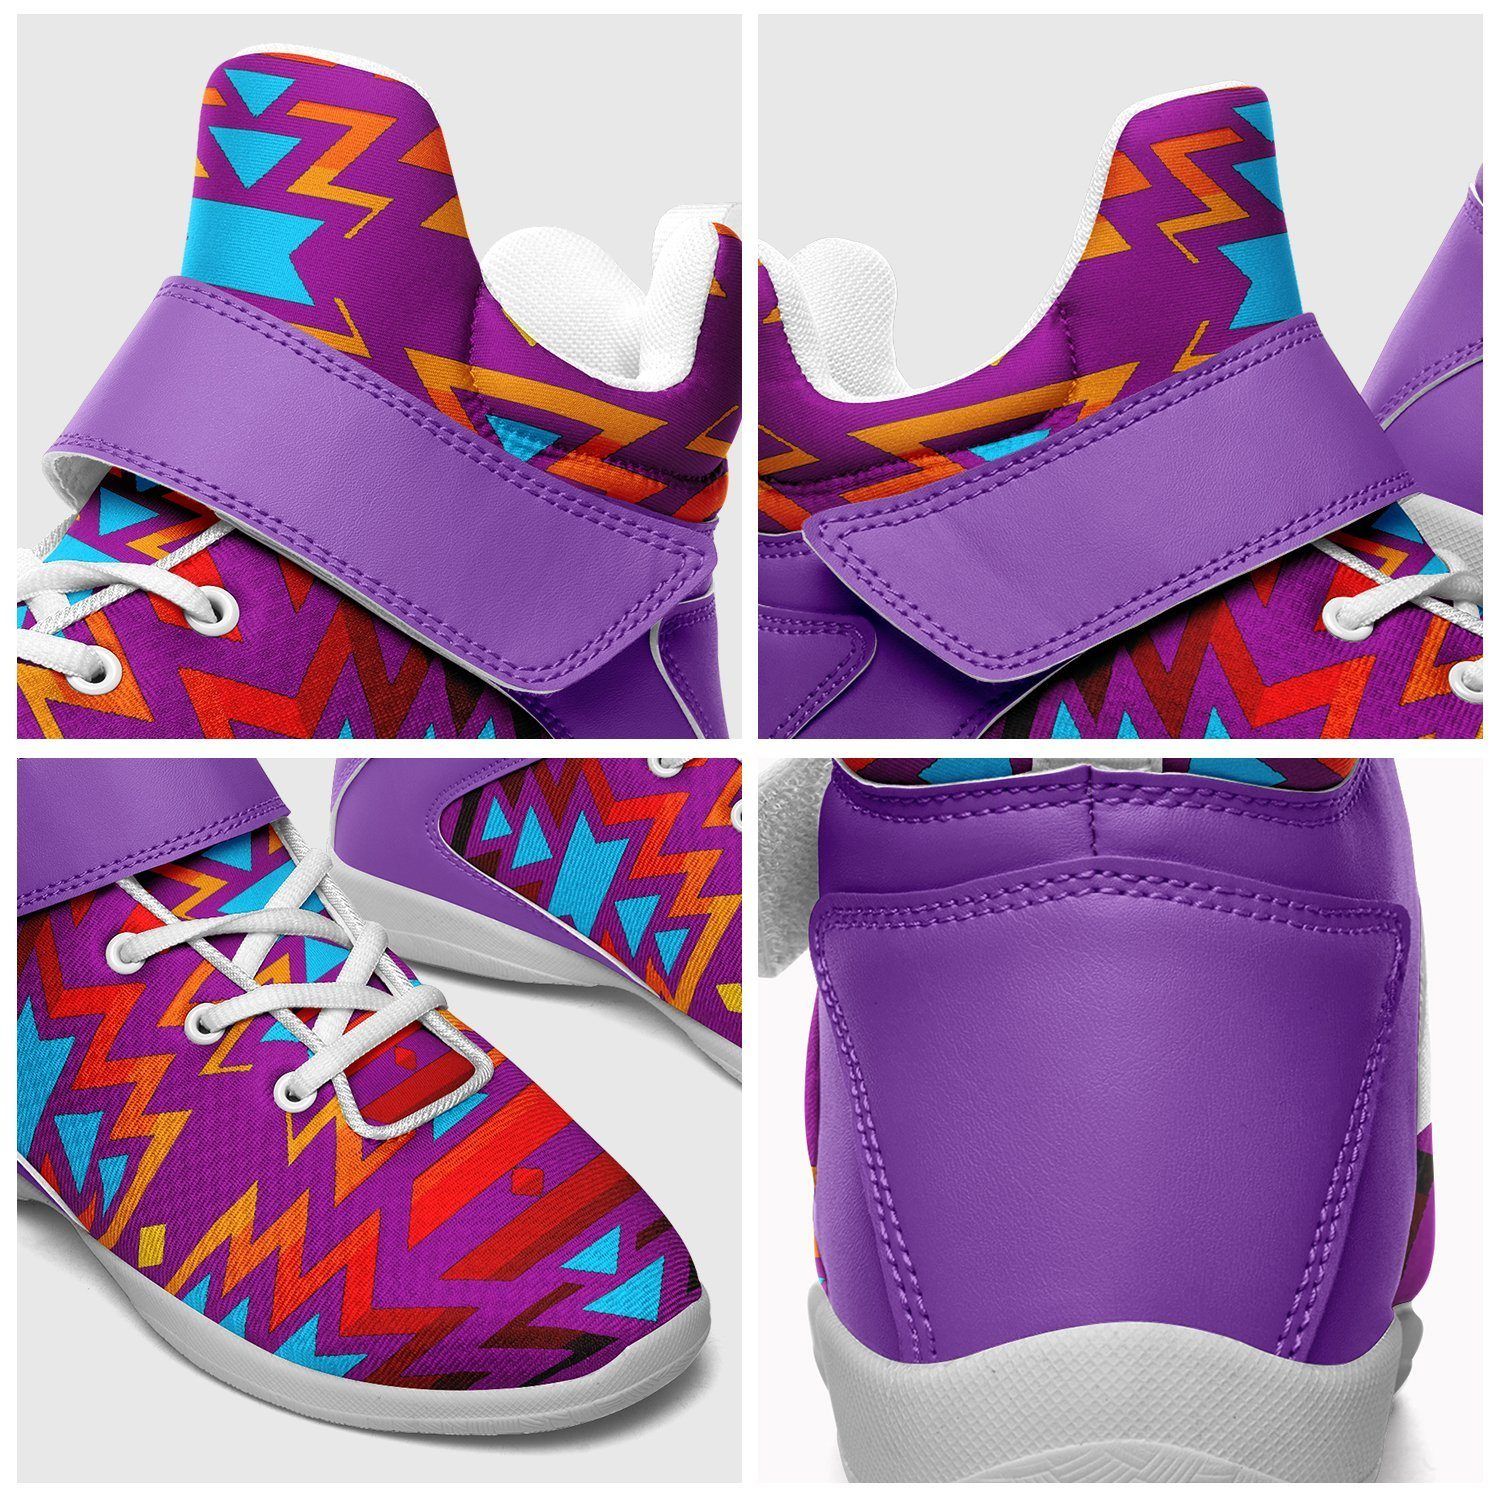 Fire Colors and Turquoise Purple Kid's Ipottaa Basketball / Sport High Top Shoes 49 Dzine 